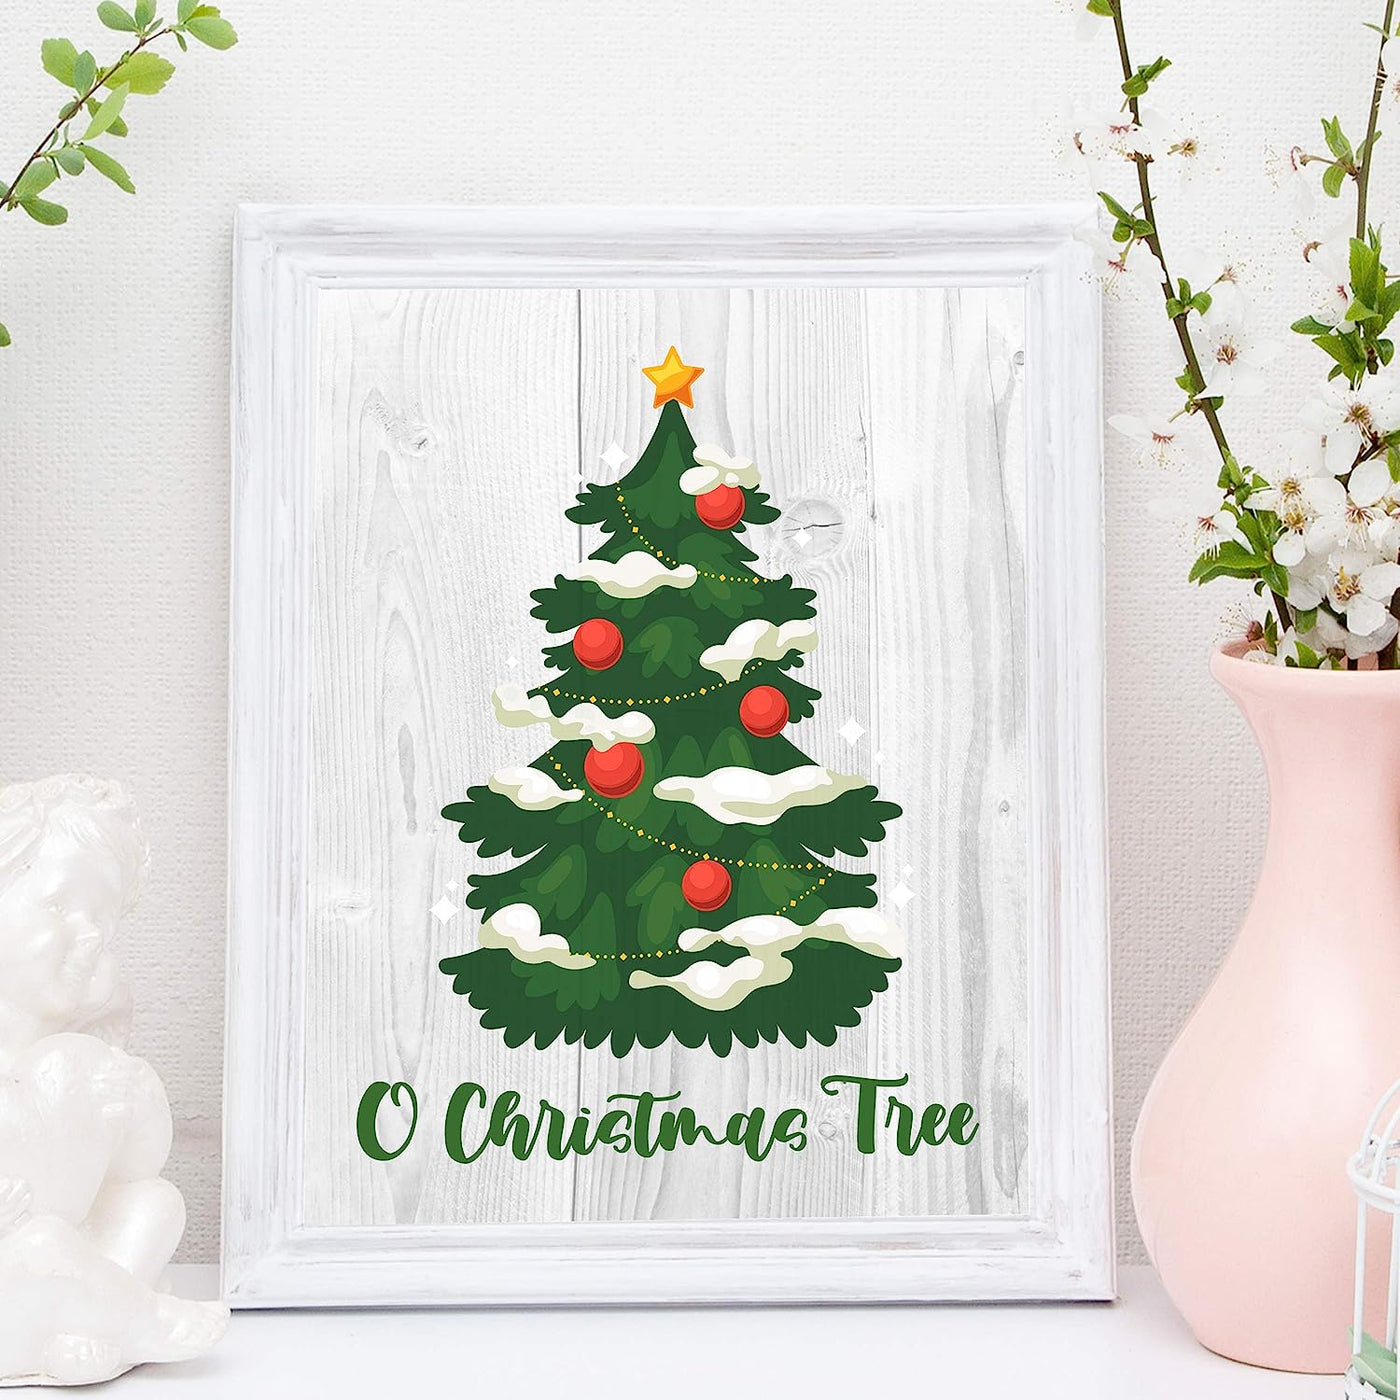 O Christmas Tree Holiday Song Art- Rustic Farmhouse Decor -11 x 14" Christmas Tree Wall Print w/Replica Wood Design-Ready to Frame. Perfect Home-Kitchen-Welcome-Entryway Decor. Printed on Paper.